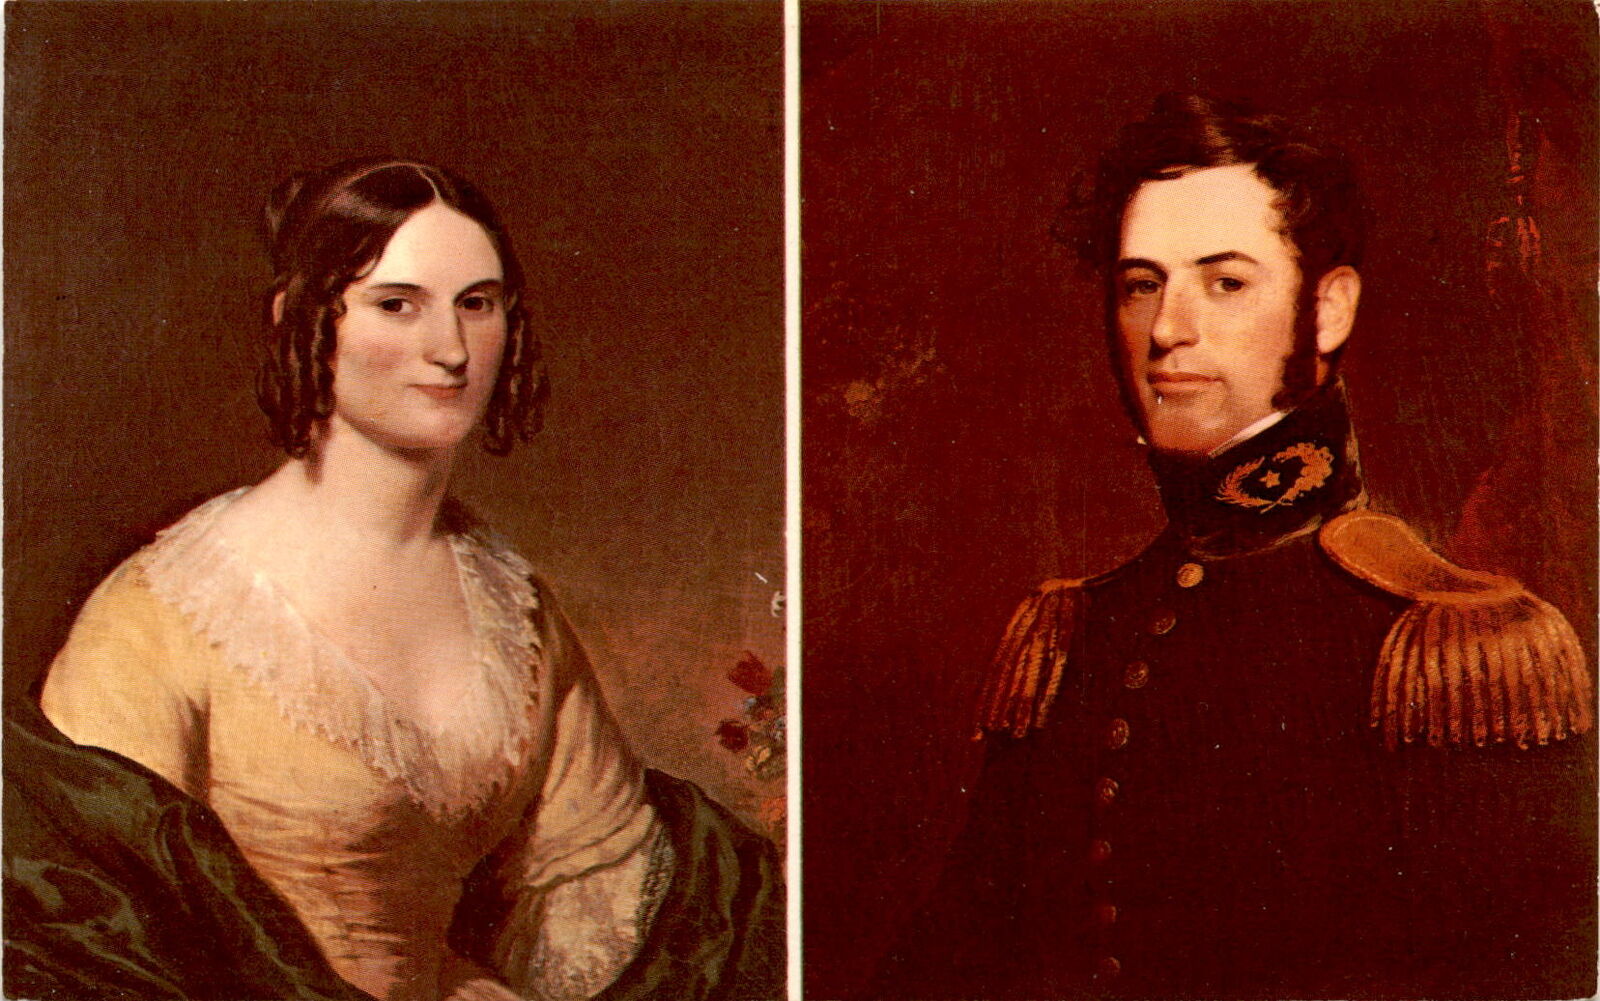 First known portraits of Robert E. Lee and wife Mary Custis